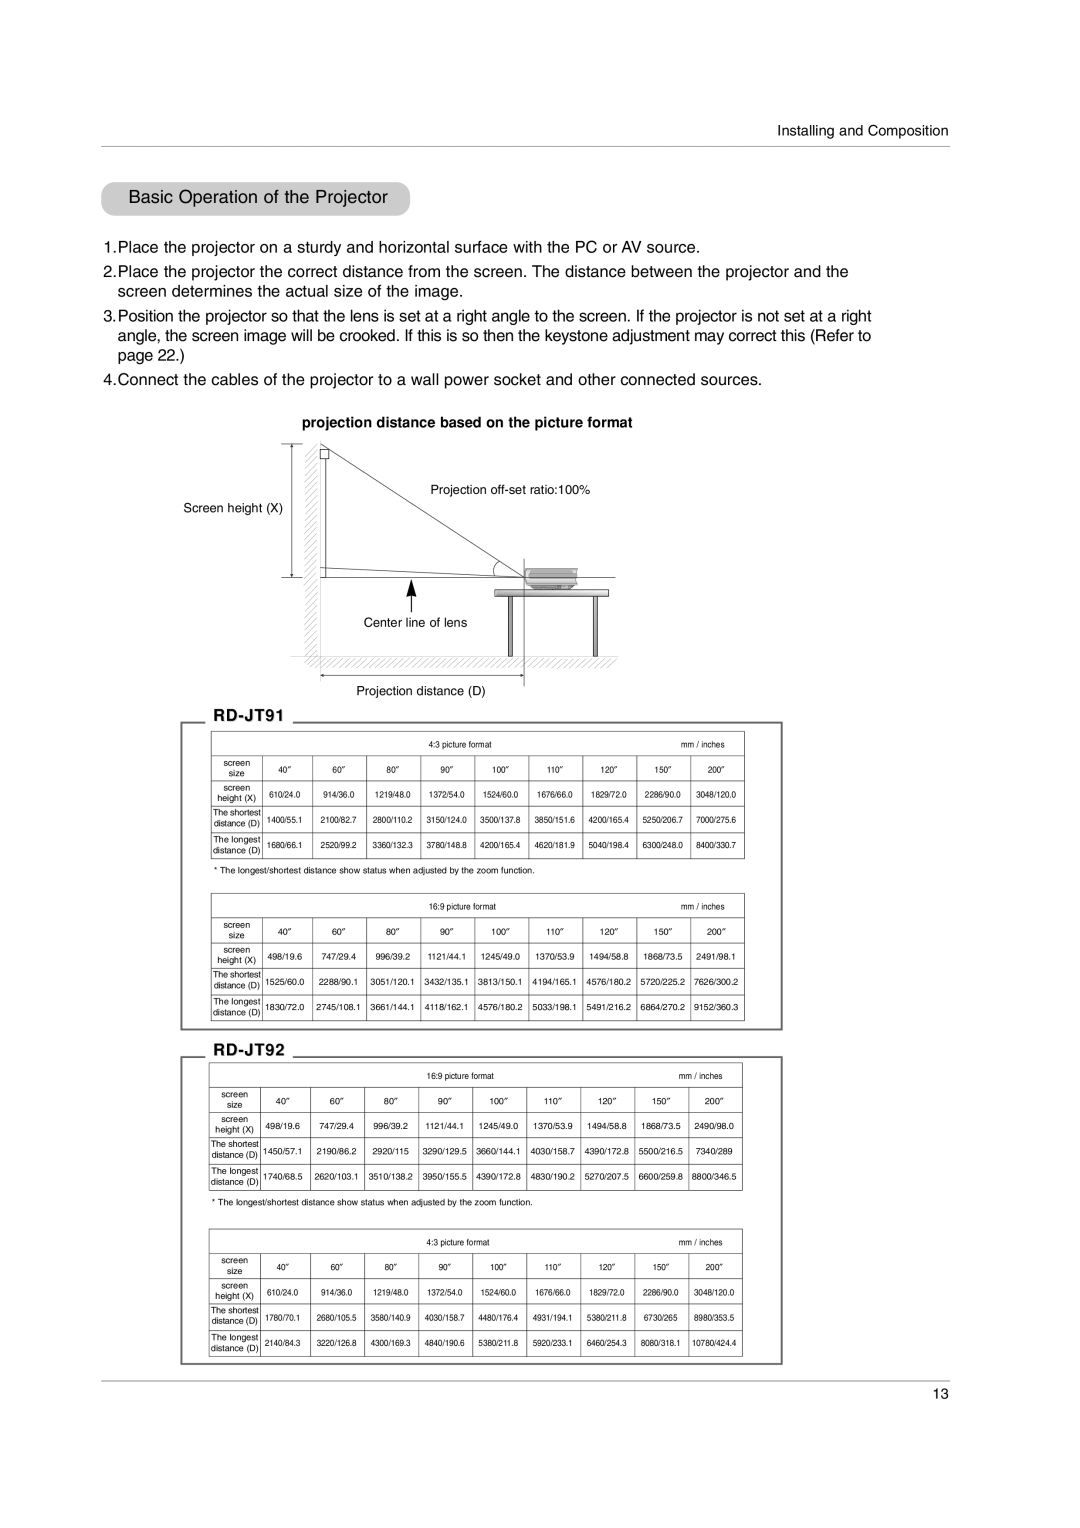 LG Electronics RD-JT91 owner manual Basic Operation of the Projector, RD-JT92 